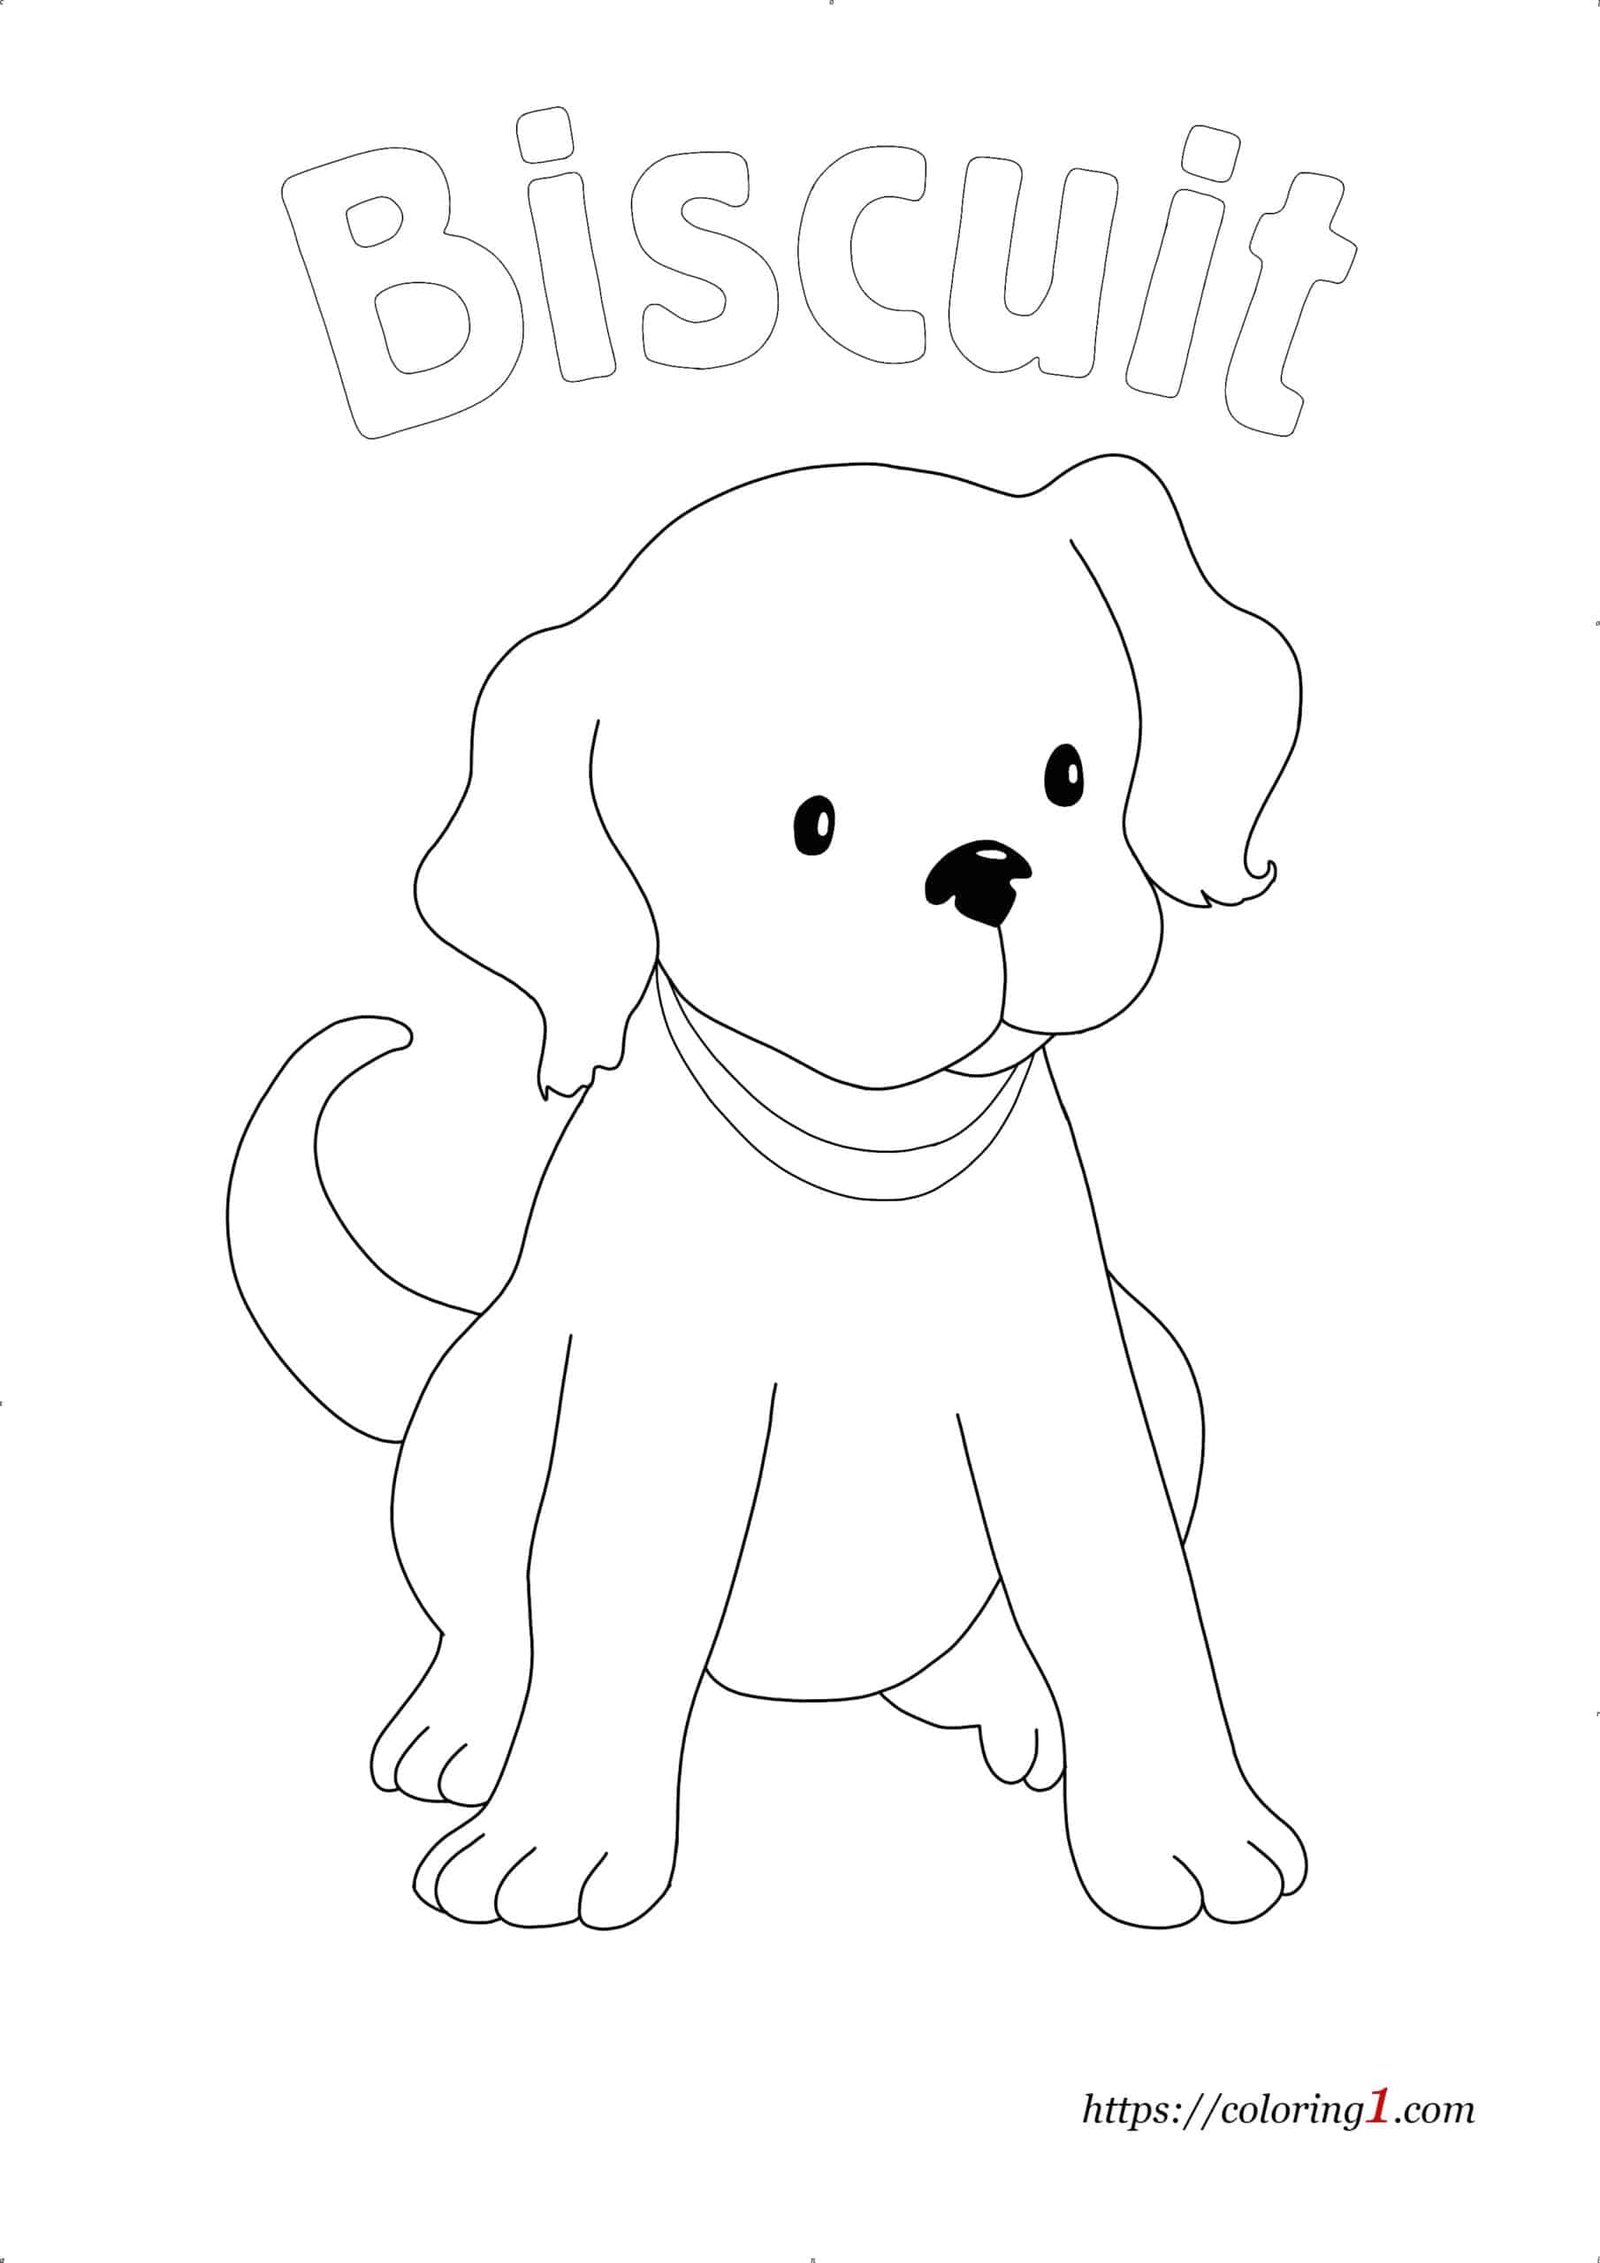 Biscuit The Dog coloring page